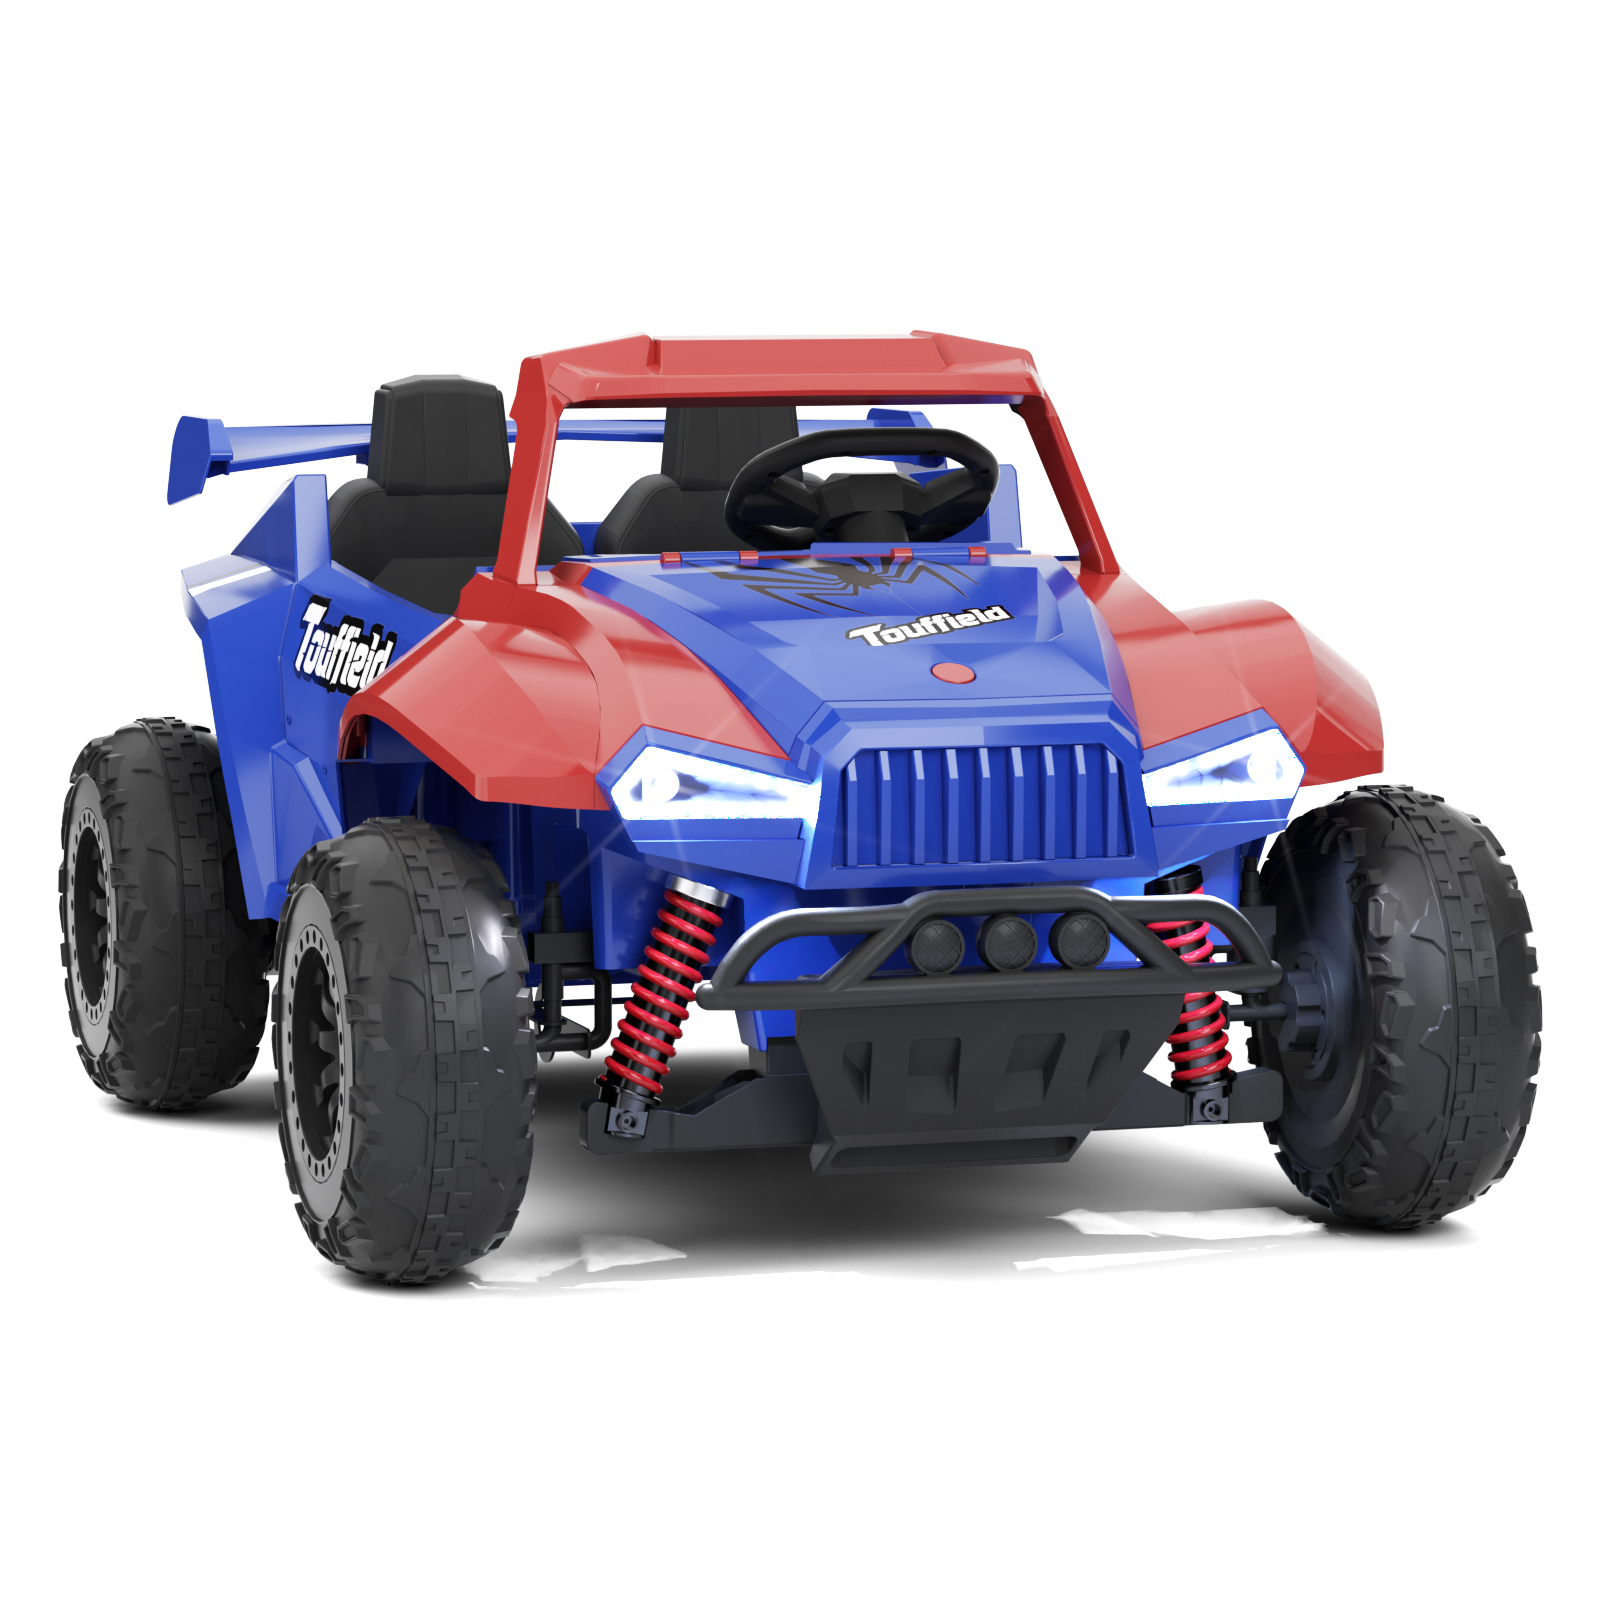 XJD 12V/24V 7AH Ride On Car with Remote Control, 2WD/4WD Switchable, 2 Seats, Power Car for Kids, Blue&Red